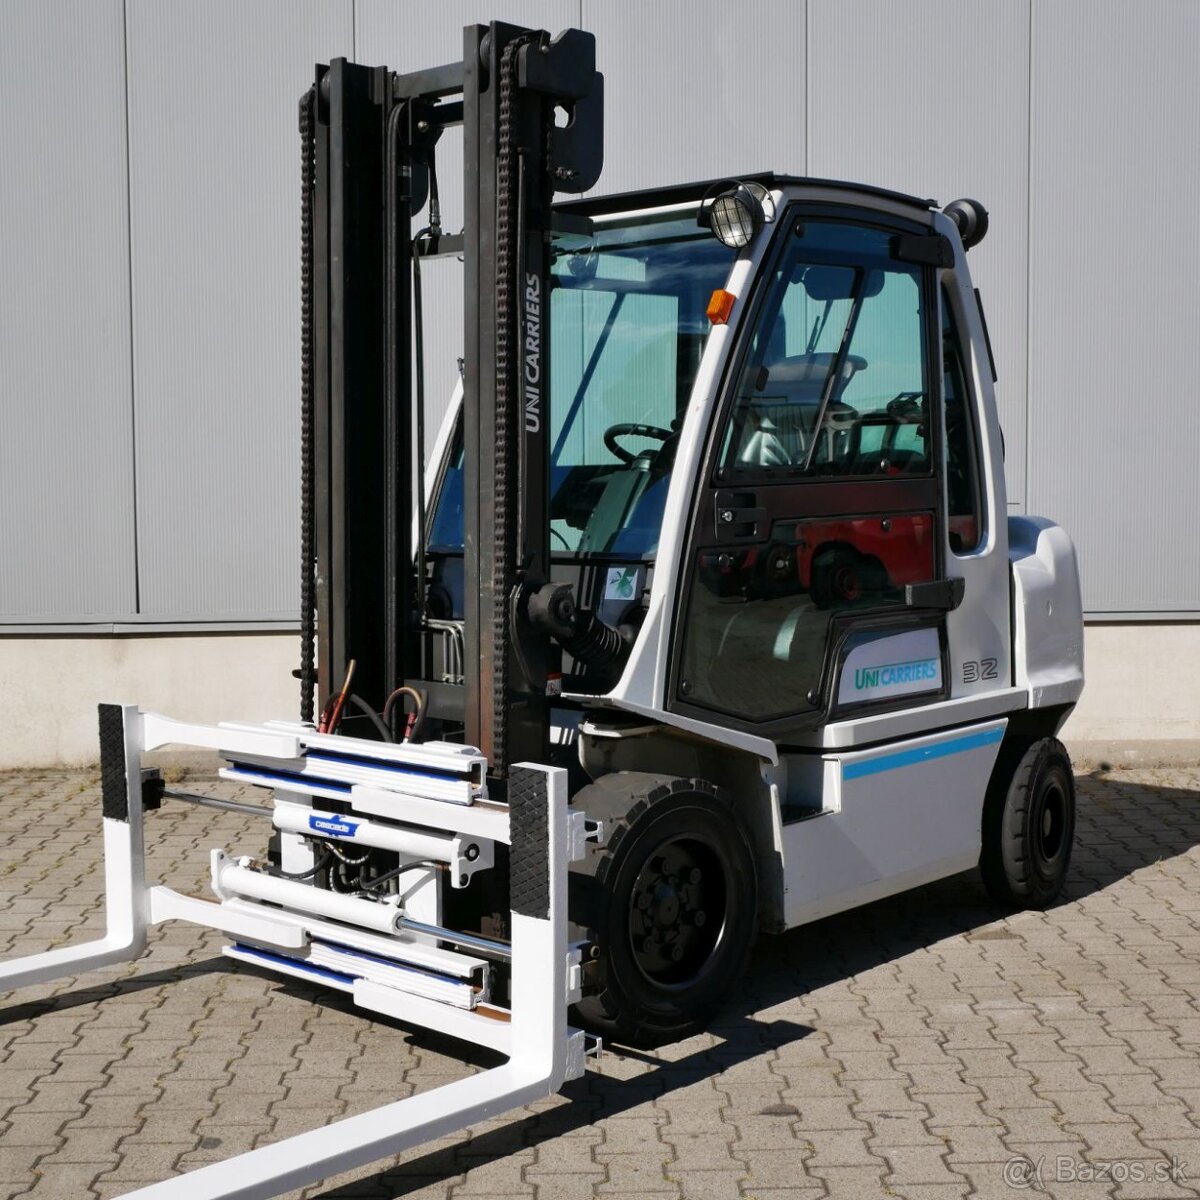 Unicarriers DX32